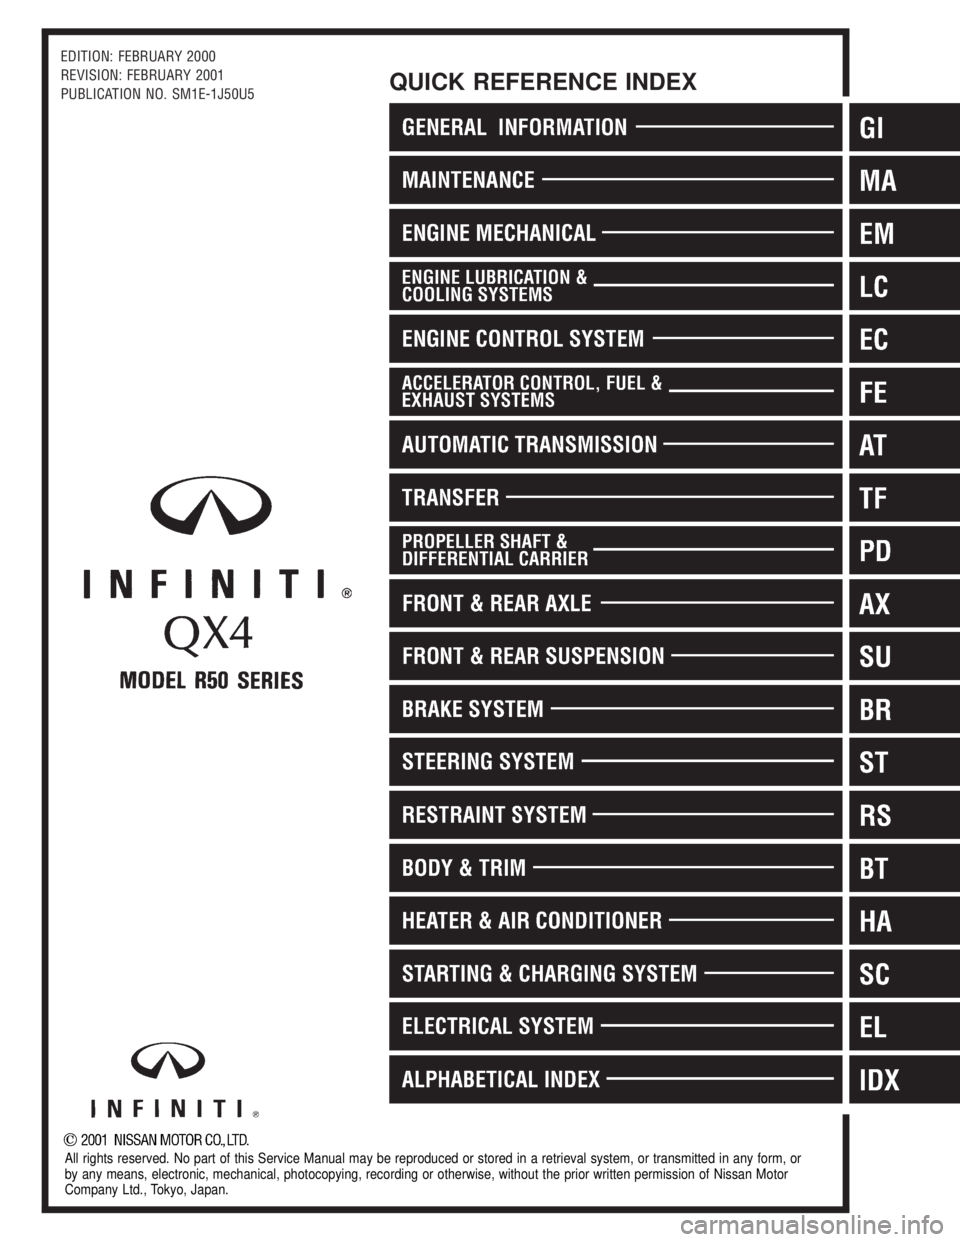 INFINITI QX4 2001  Factory Service Manual EDITION: FEBRUARY 2000
REVISION: FEBRUARY 2001
PUBLICATION NO. SM1E-1J50U5
QUICK REFERENCE INDEX
All rights reserved. No part of this Service Manual may be reproduced or stored in a retrieval system, 